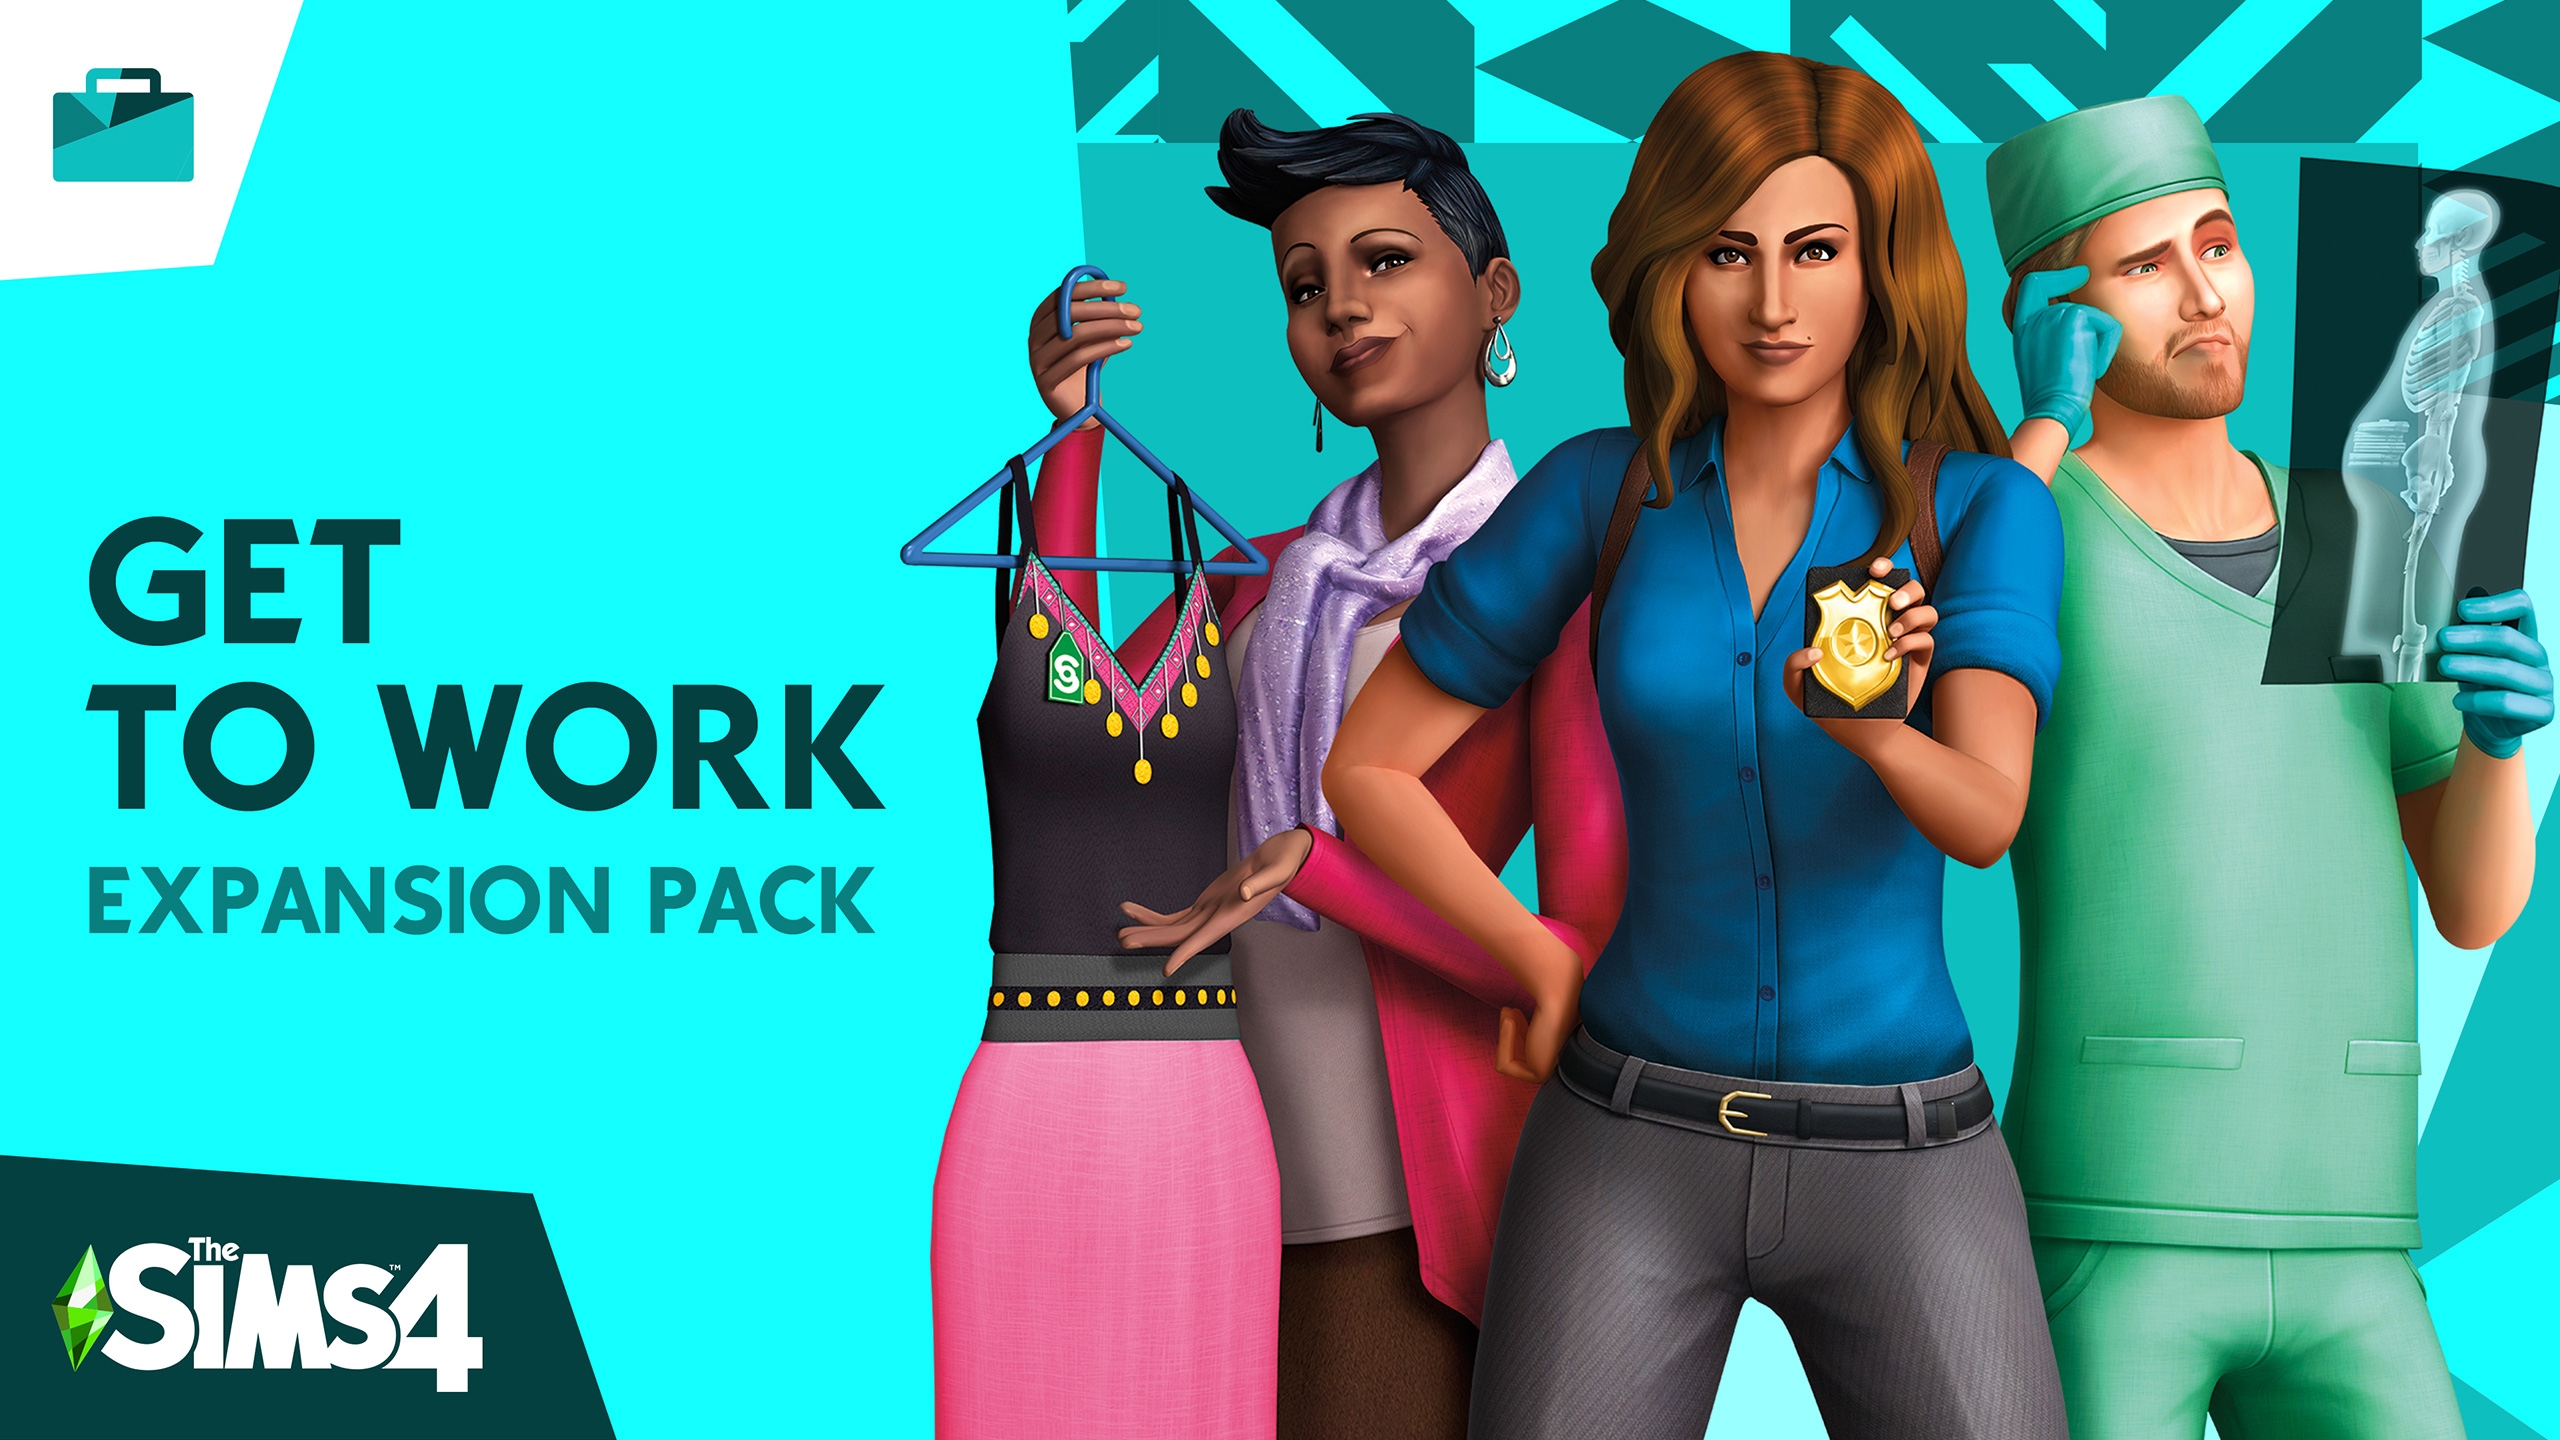 The Sims™ 4 Everyday Sims Bundle on Steam